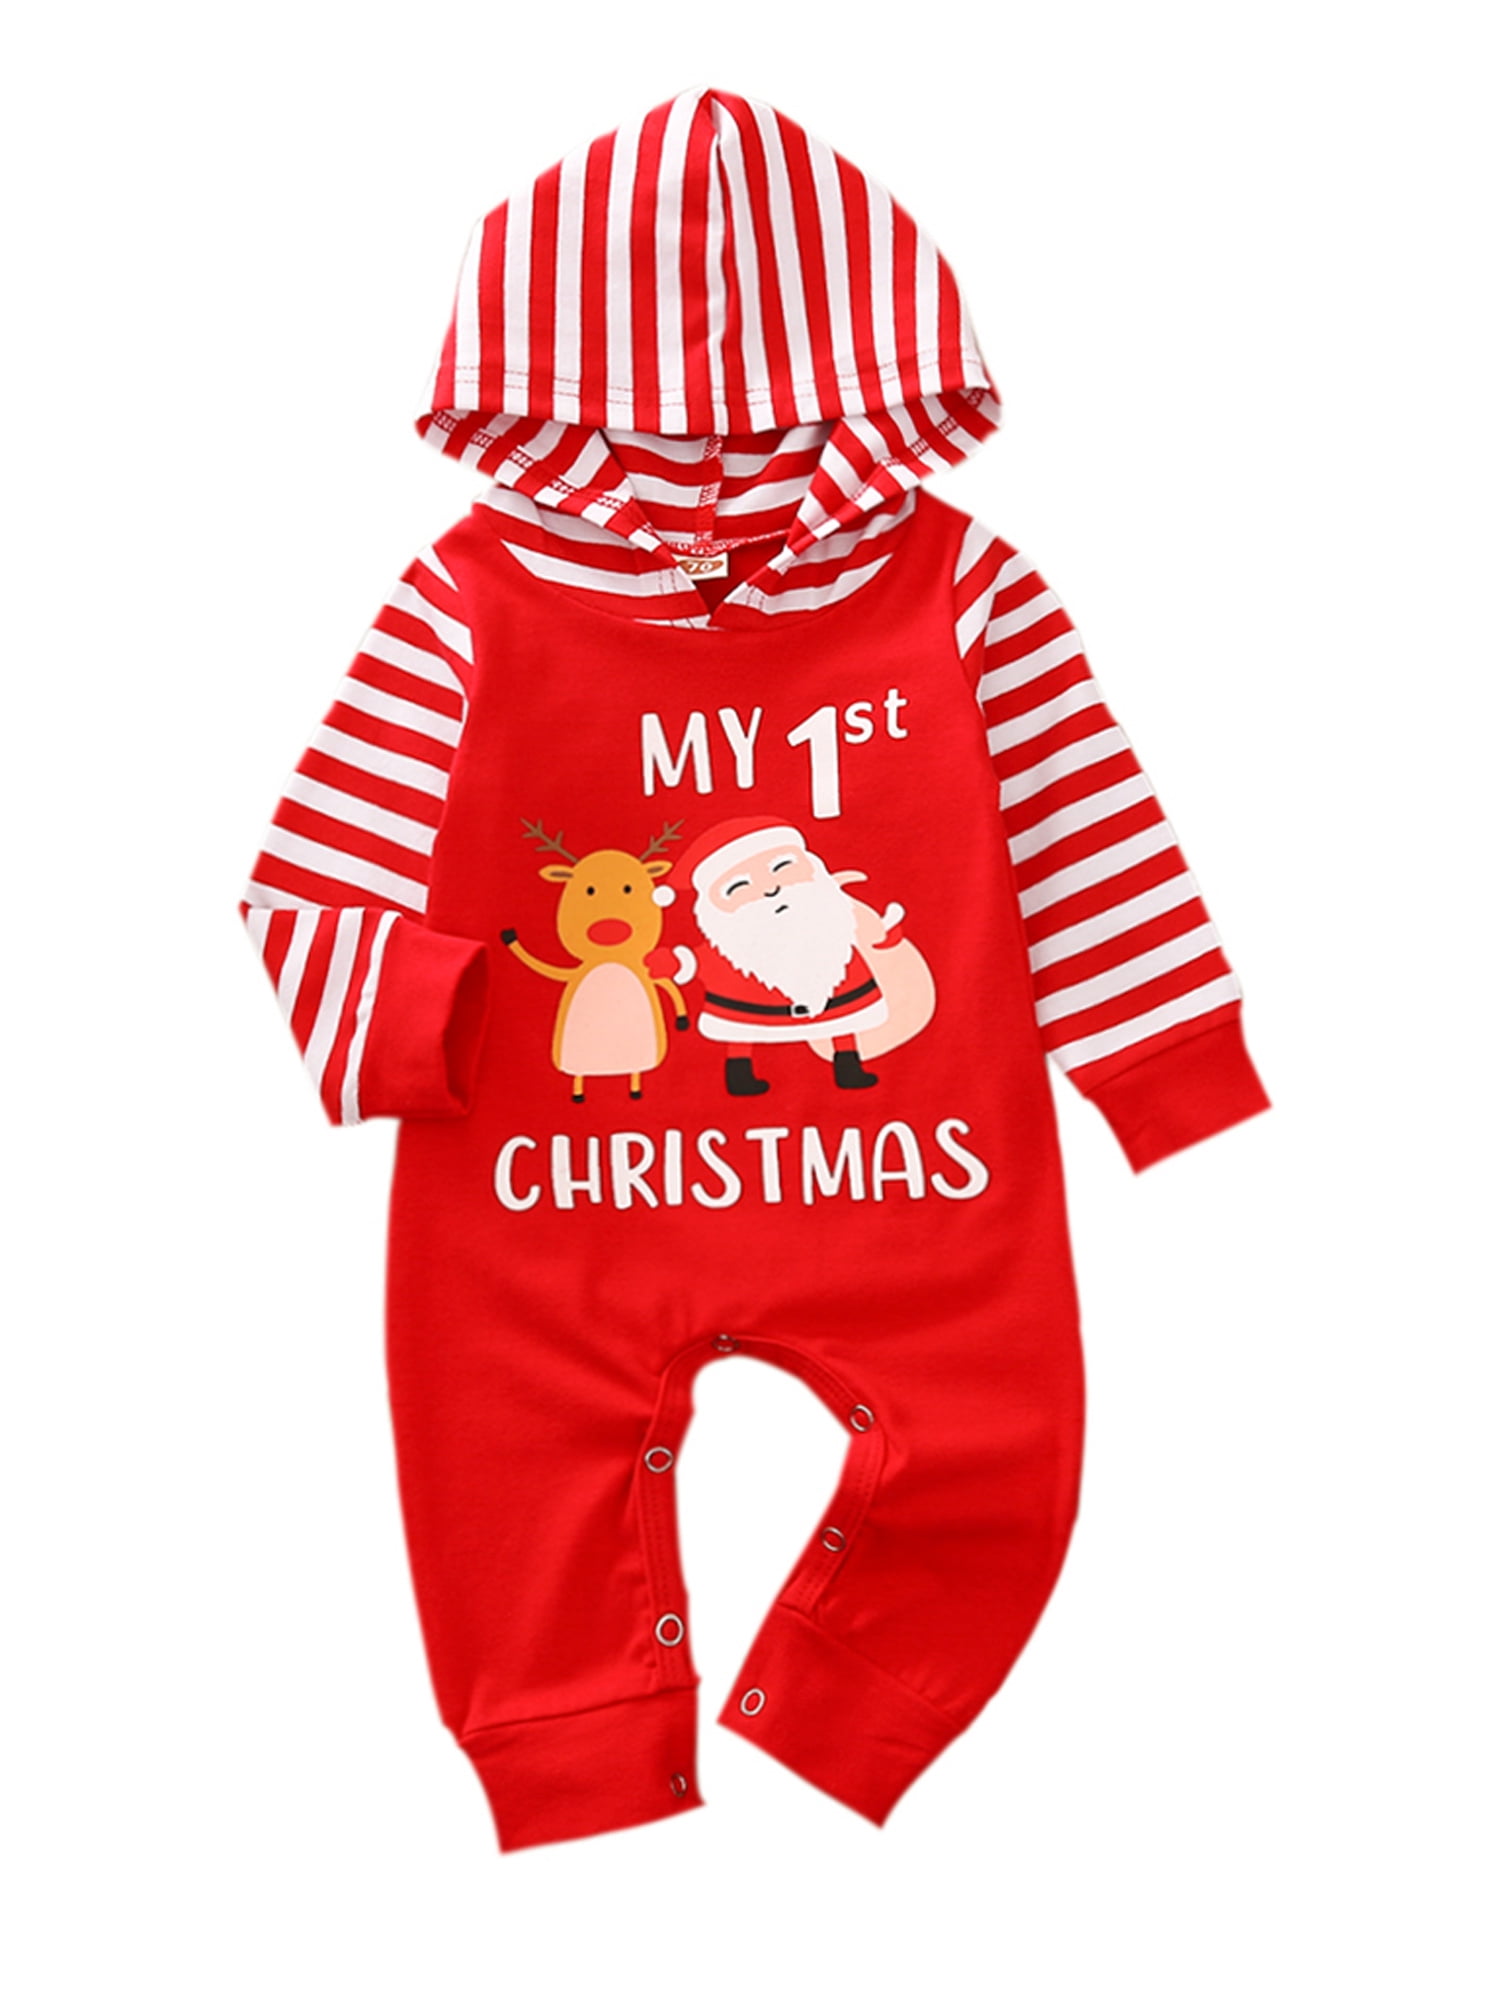 Merqwadd Unisex Infant Baby Christmas Sweater Toddler Reindeer Knit Jumpsuit Outfit